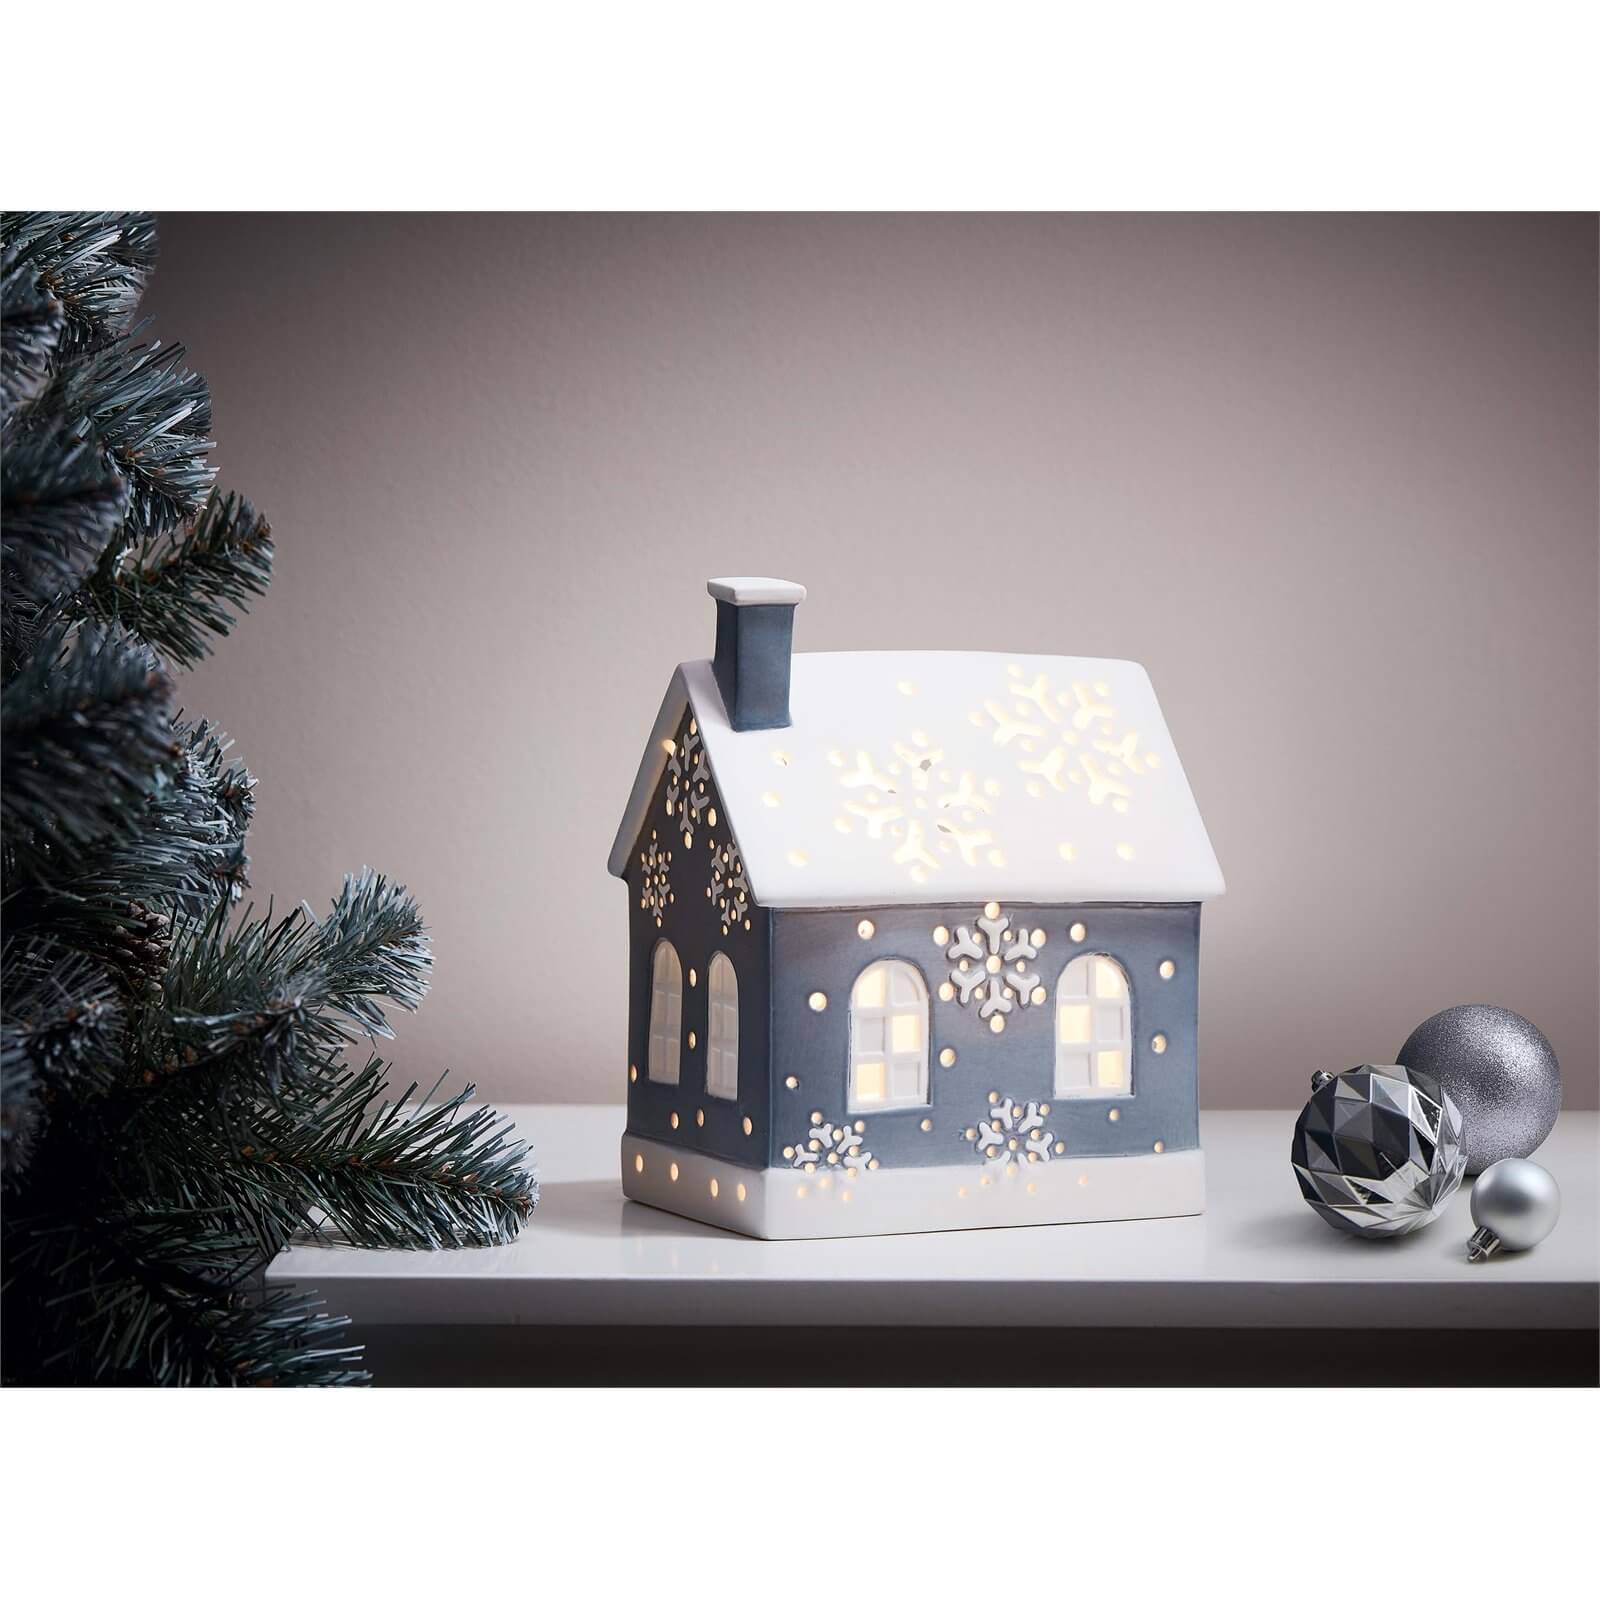 Porcelain House Light Up Decoration (Battery Operated)